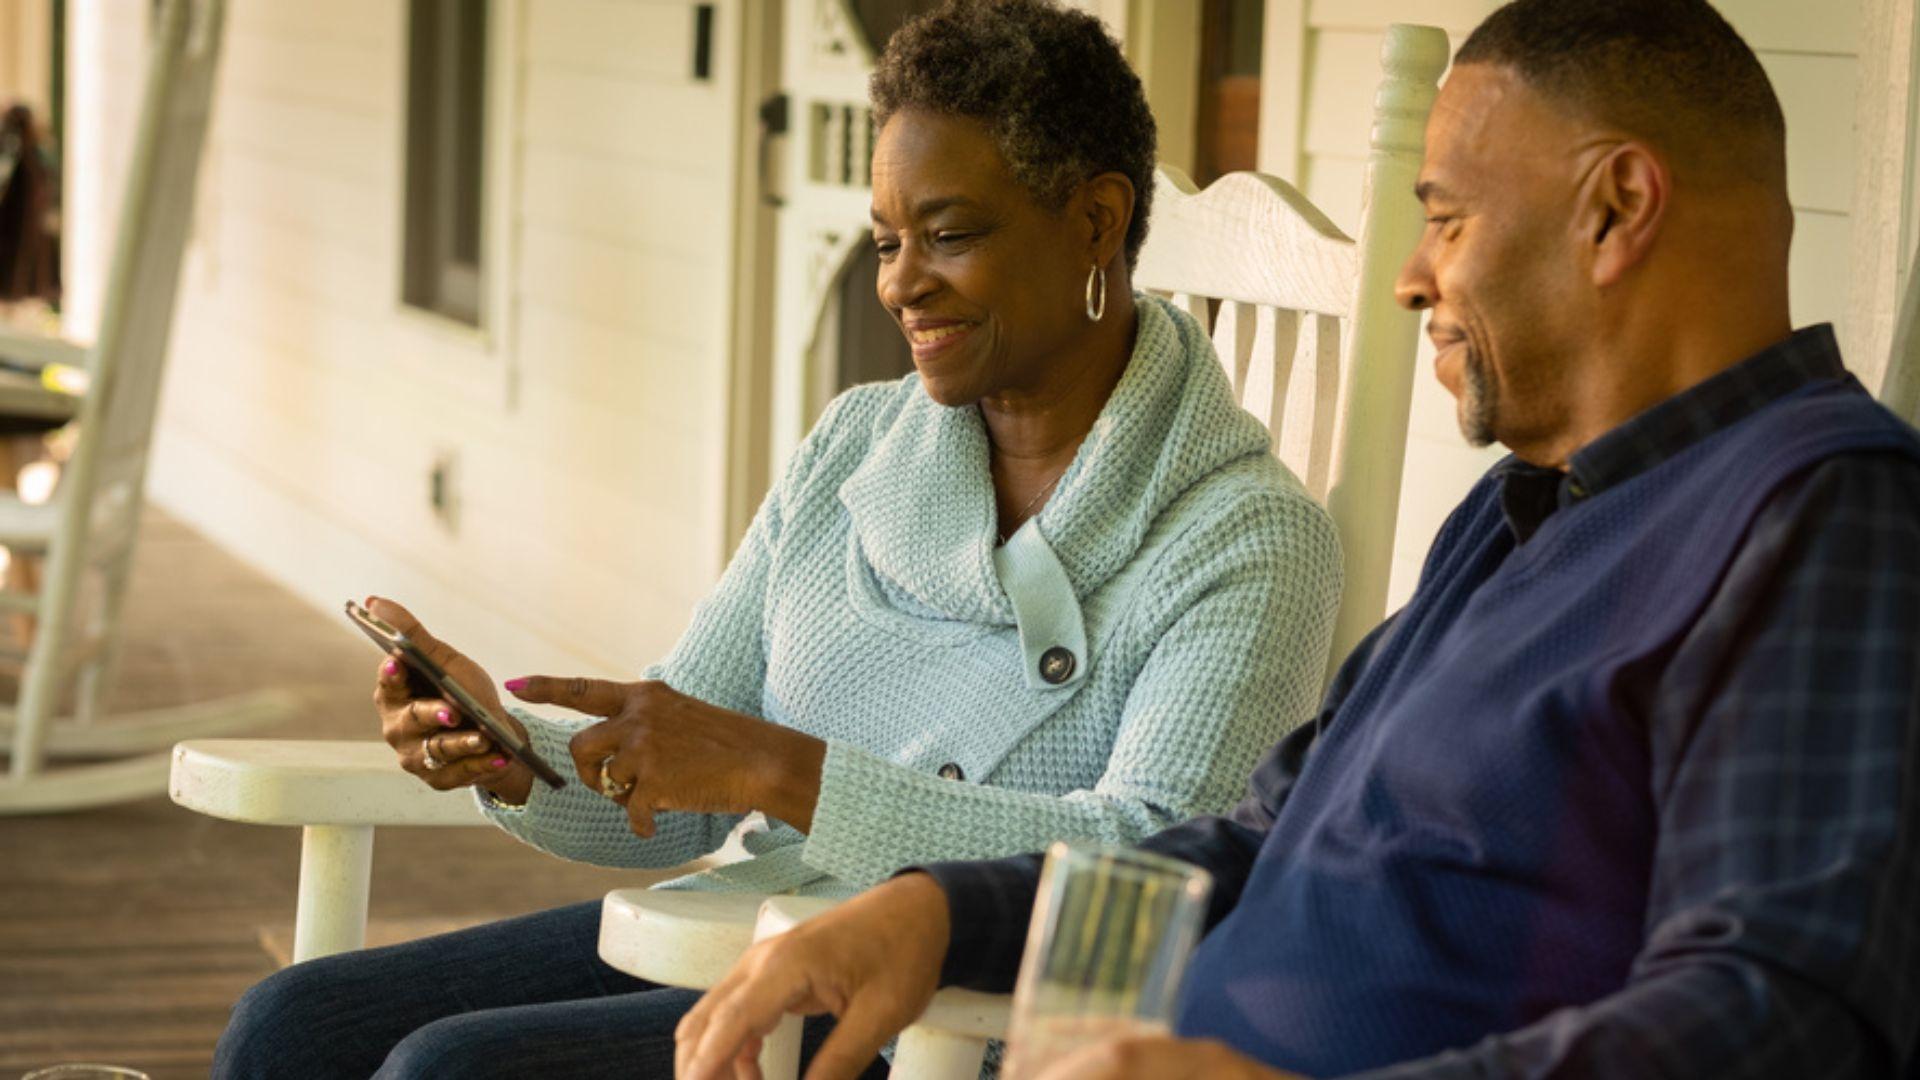 Black couple smiling looking at a phone